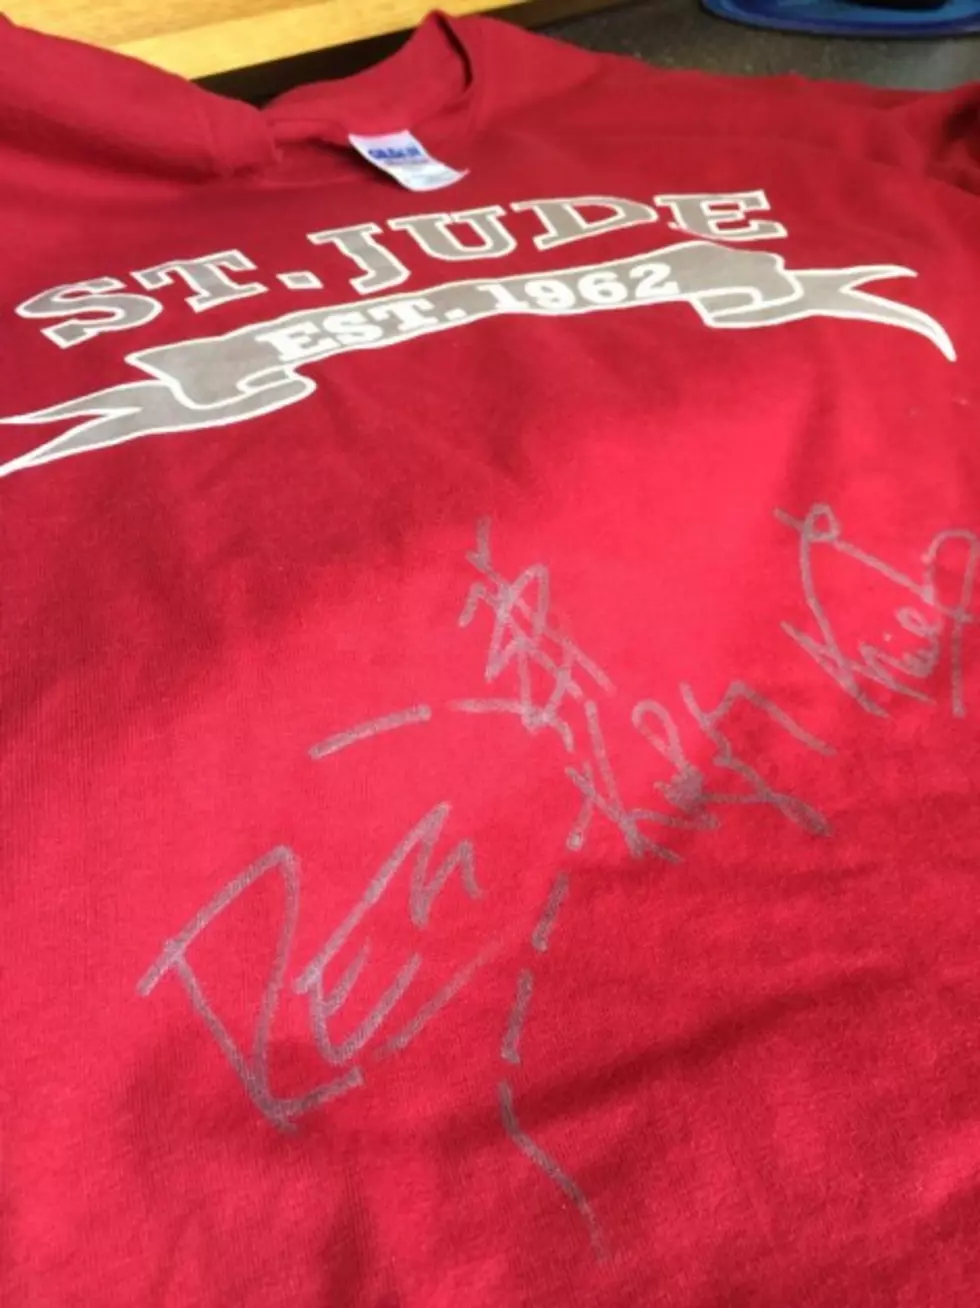 Become a Partner In Hope For Chance to Win a Shirt Autographed by The Band Perry